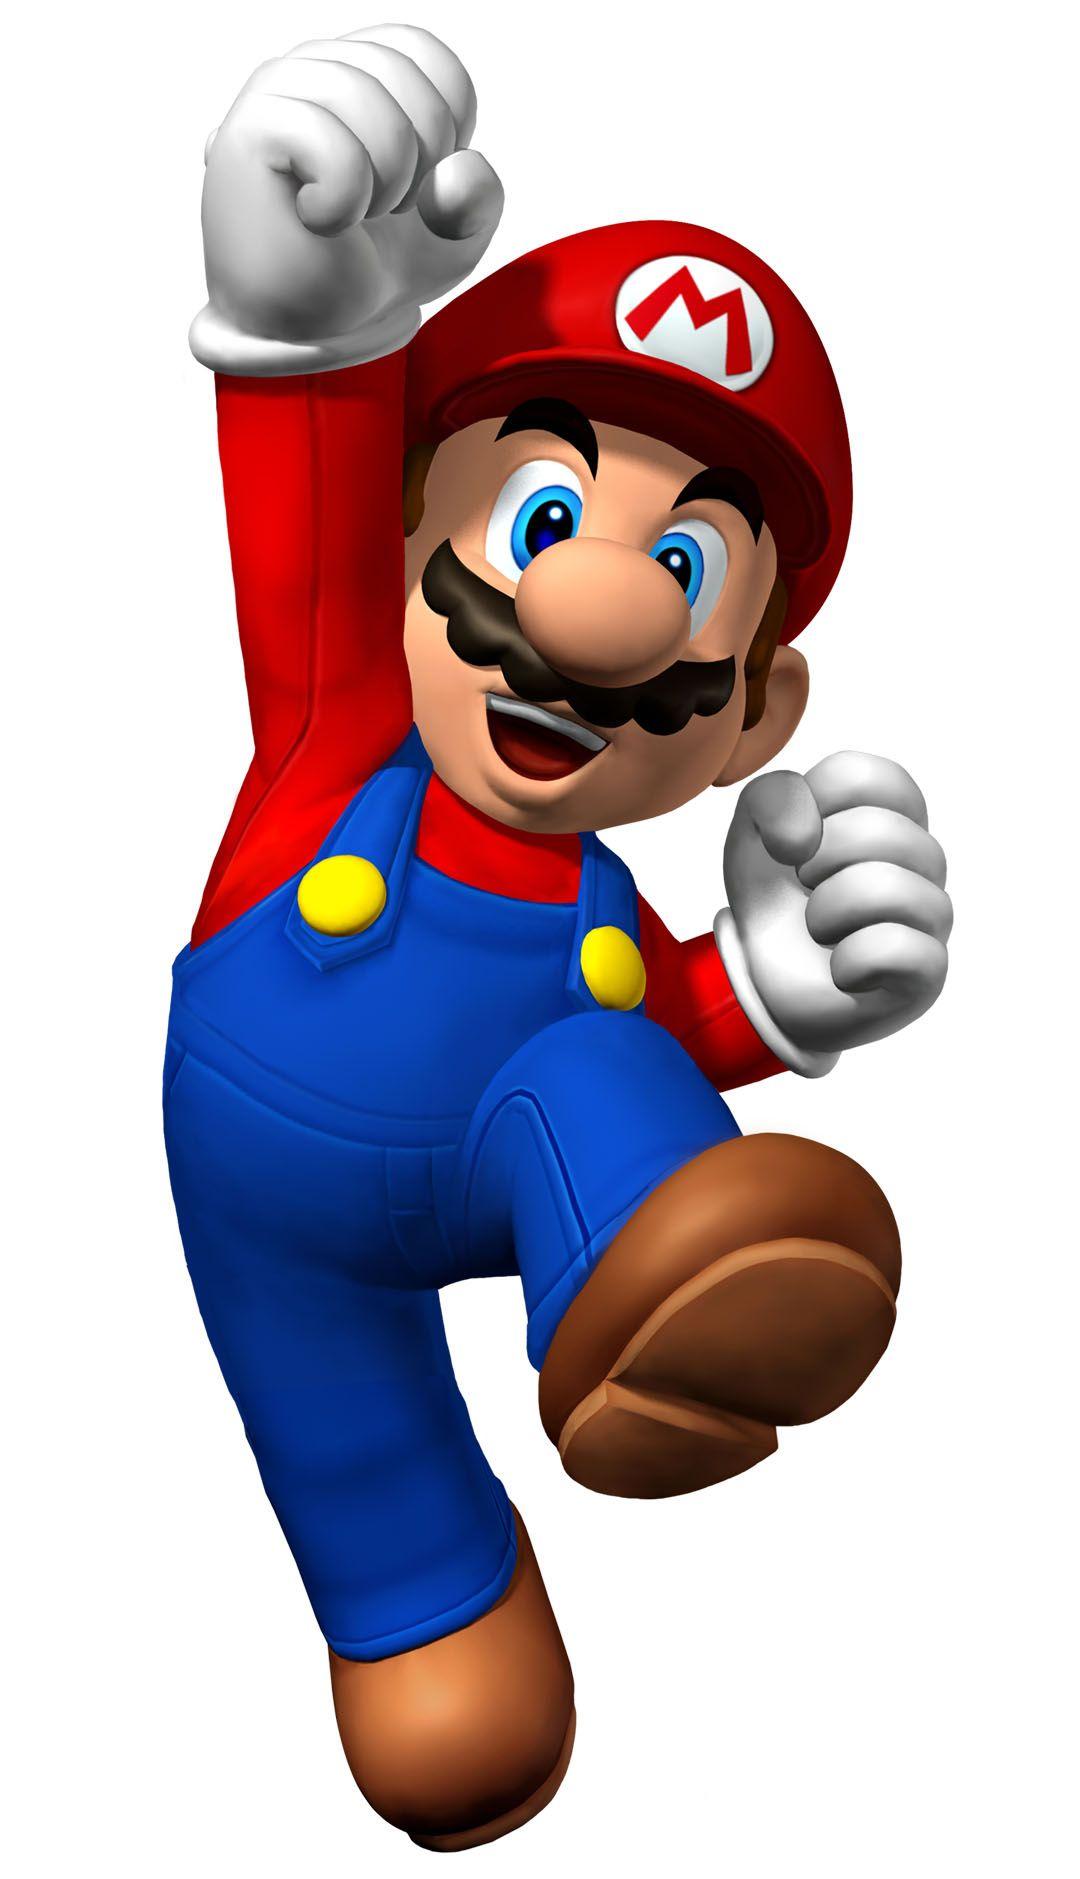 The Mario Bros. jump from game icons to silver screen stardom in